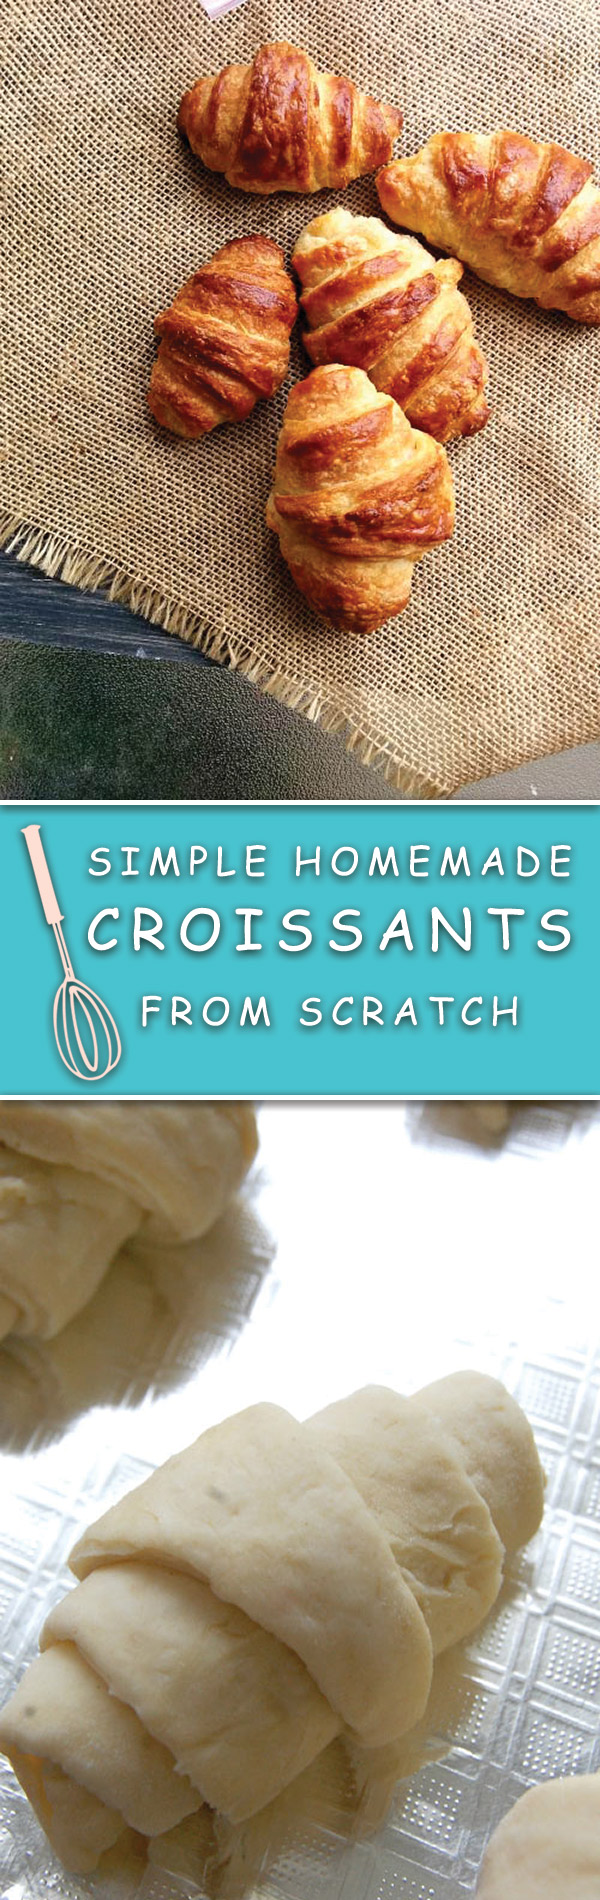 How To Make Croissants From Scratch - stop thinking & bake your very own homemade CROISSANTS, super easy steps, in no time you will have croissants better than bakery!